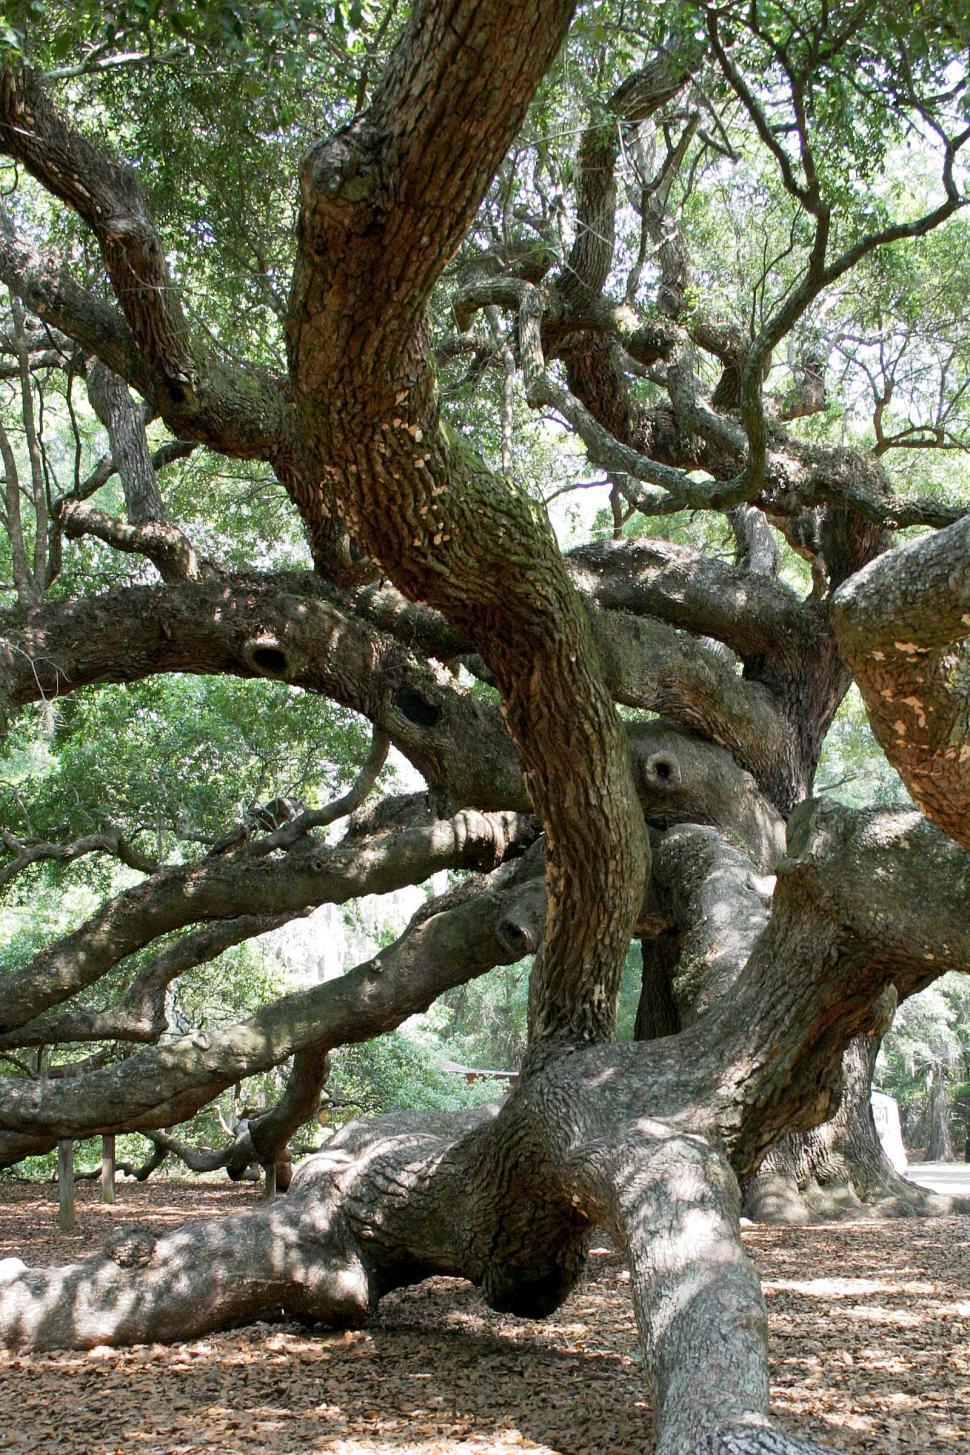 Free Image of tree oak angel south carolina massive huge ancient old large sprawling dense camopy giant limb limbs branch branches moss 